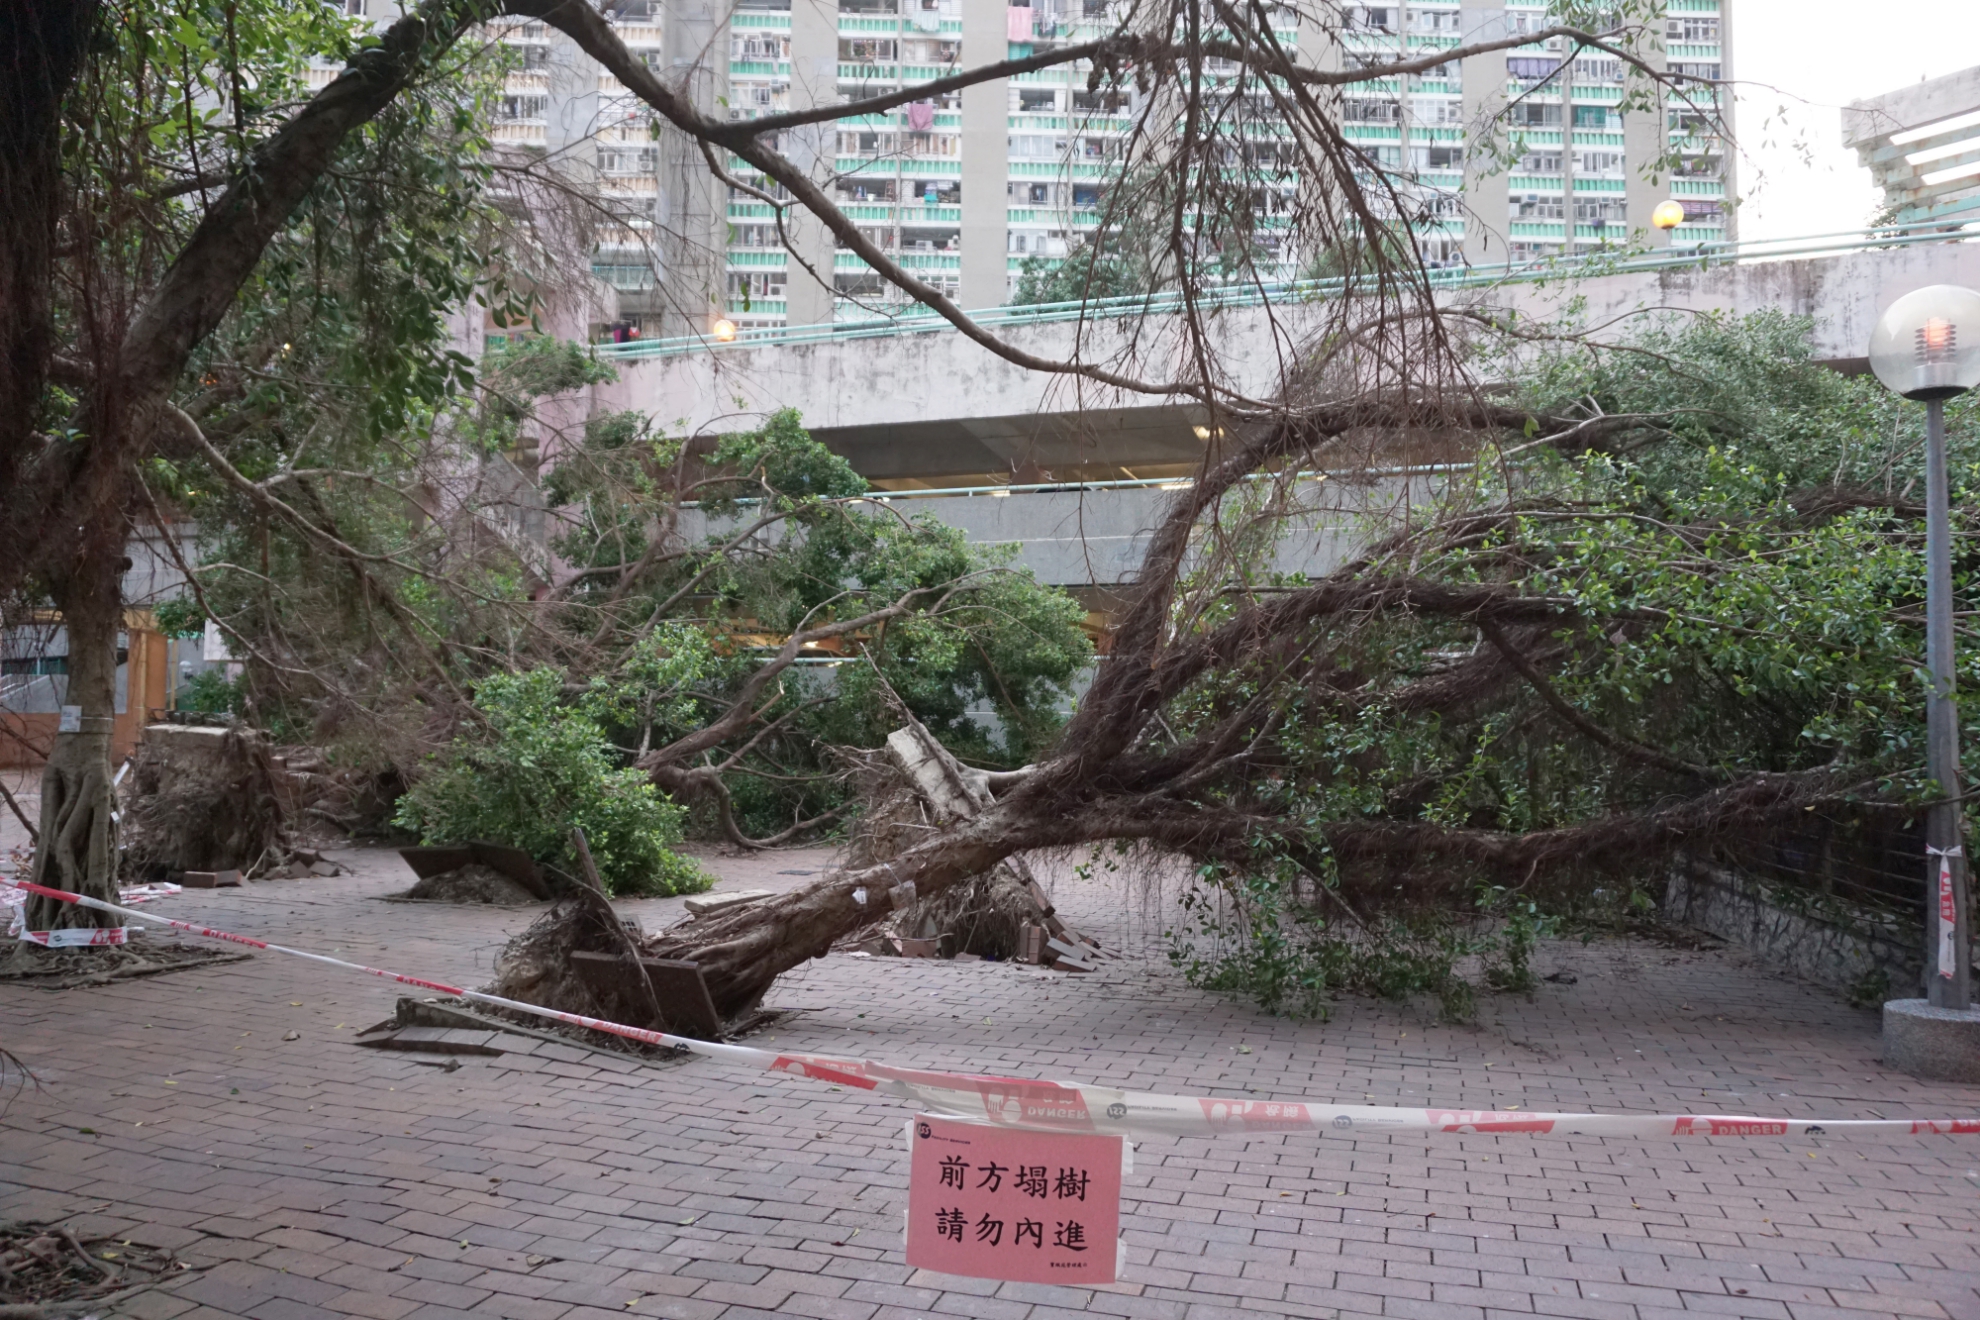 Destruction caused by 2018's Super Typhoon Mangkhut in Kwun Tong, Hong Kong (Source: Prosperity Horizons/Wikimedia Commons)